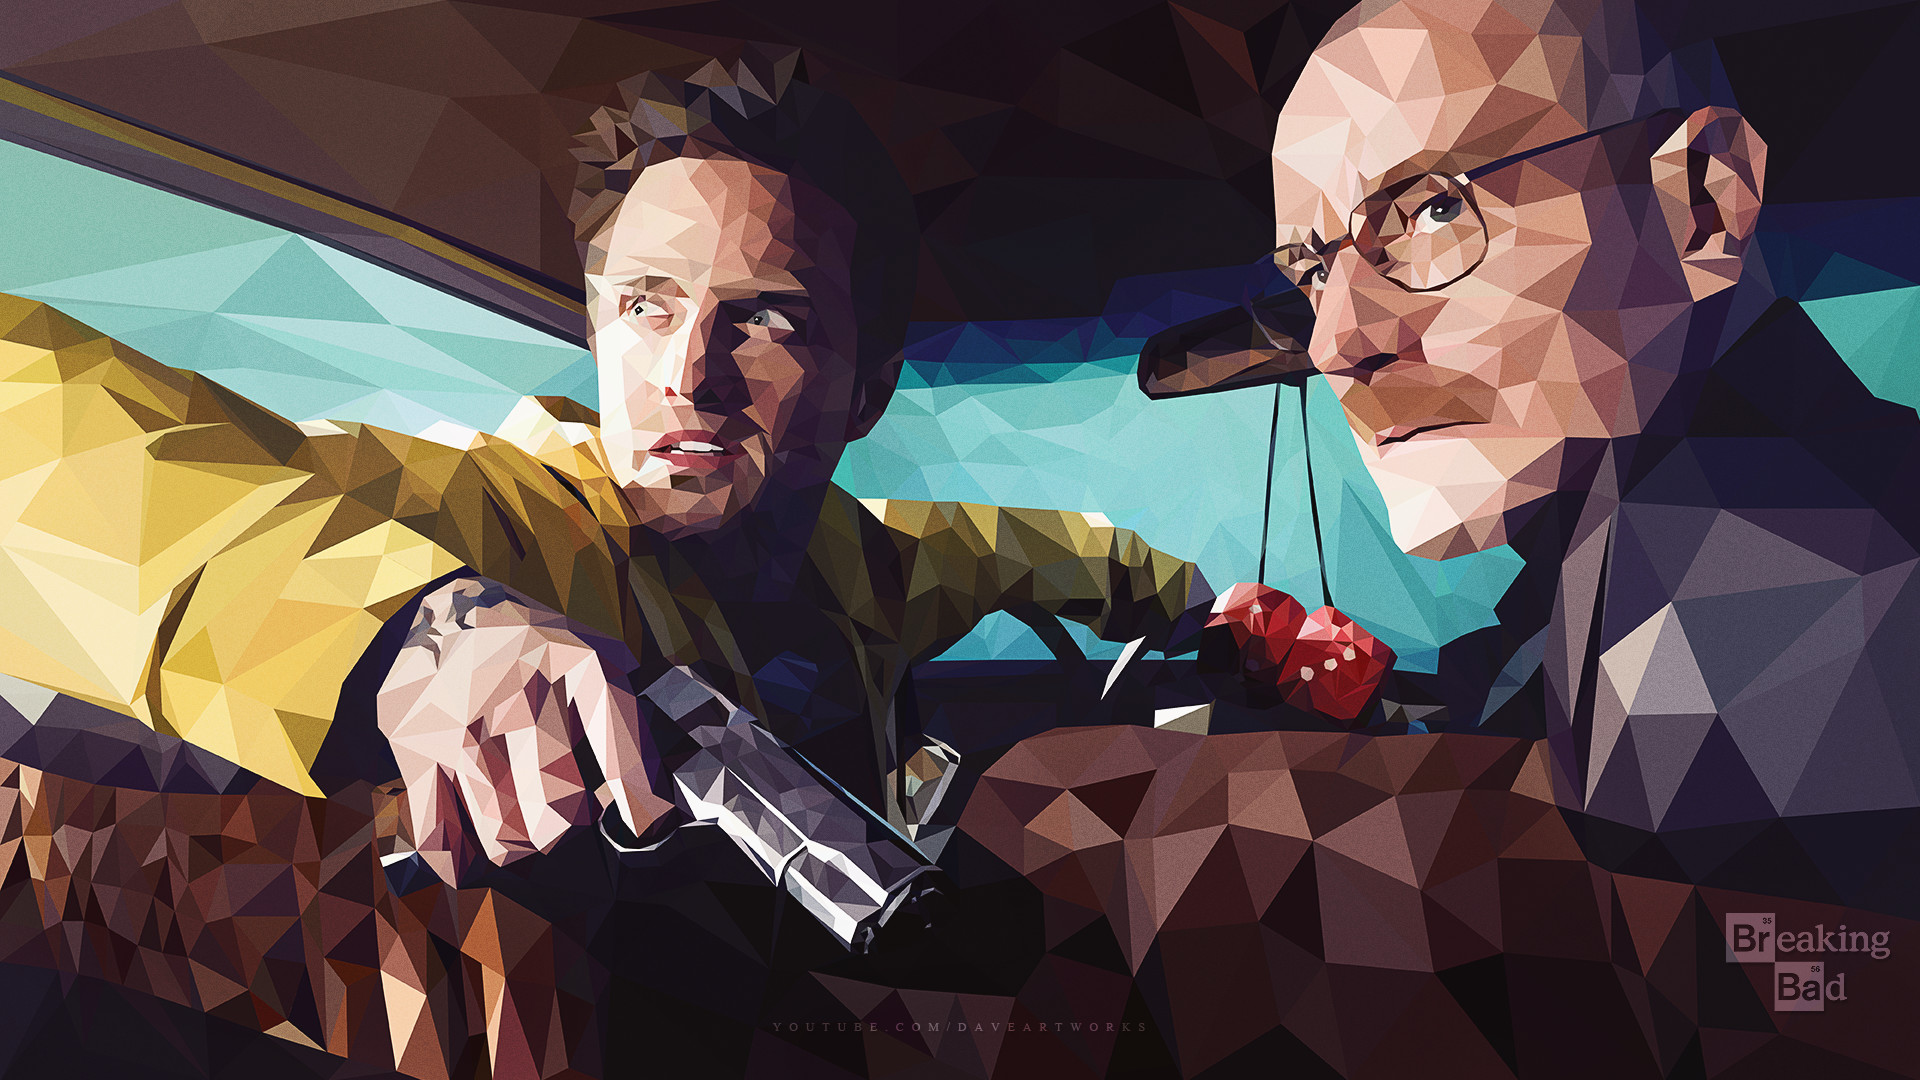 1920x1080 ... Breaking Bad - Low-Poly - Wallpaper by DaveArtworks